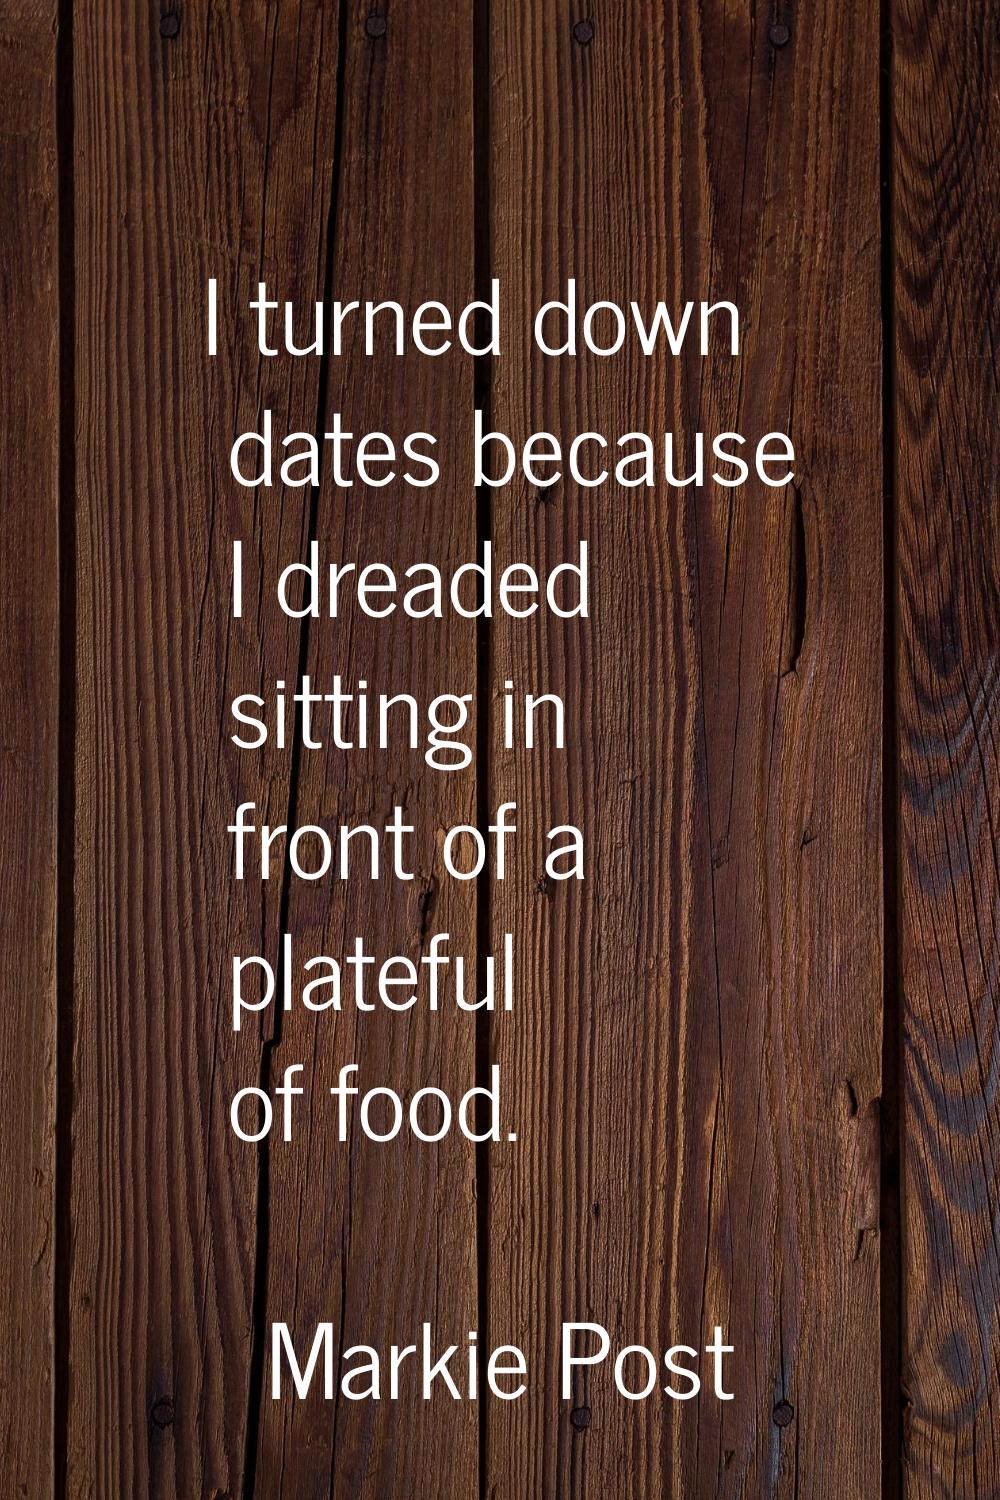 I turned down dates because I dreaded sitting in front of a plateful of food.